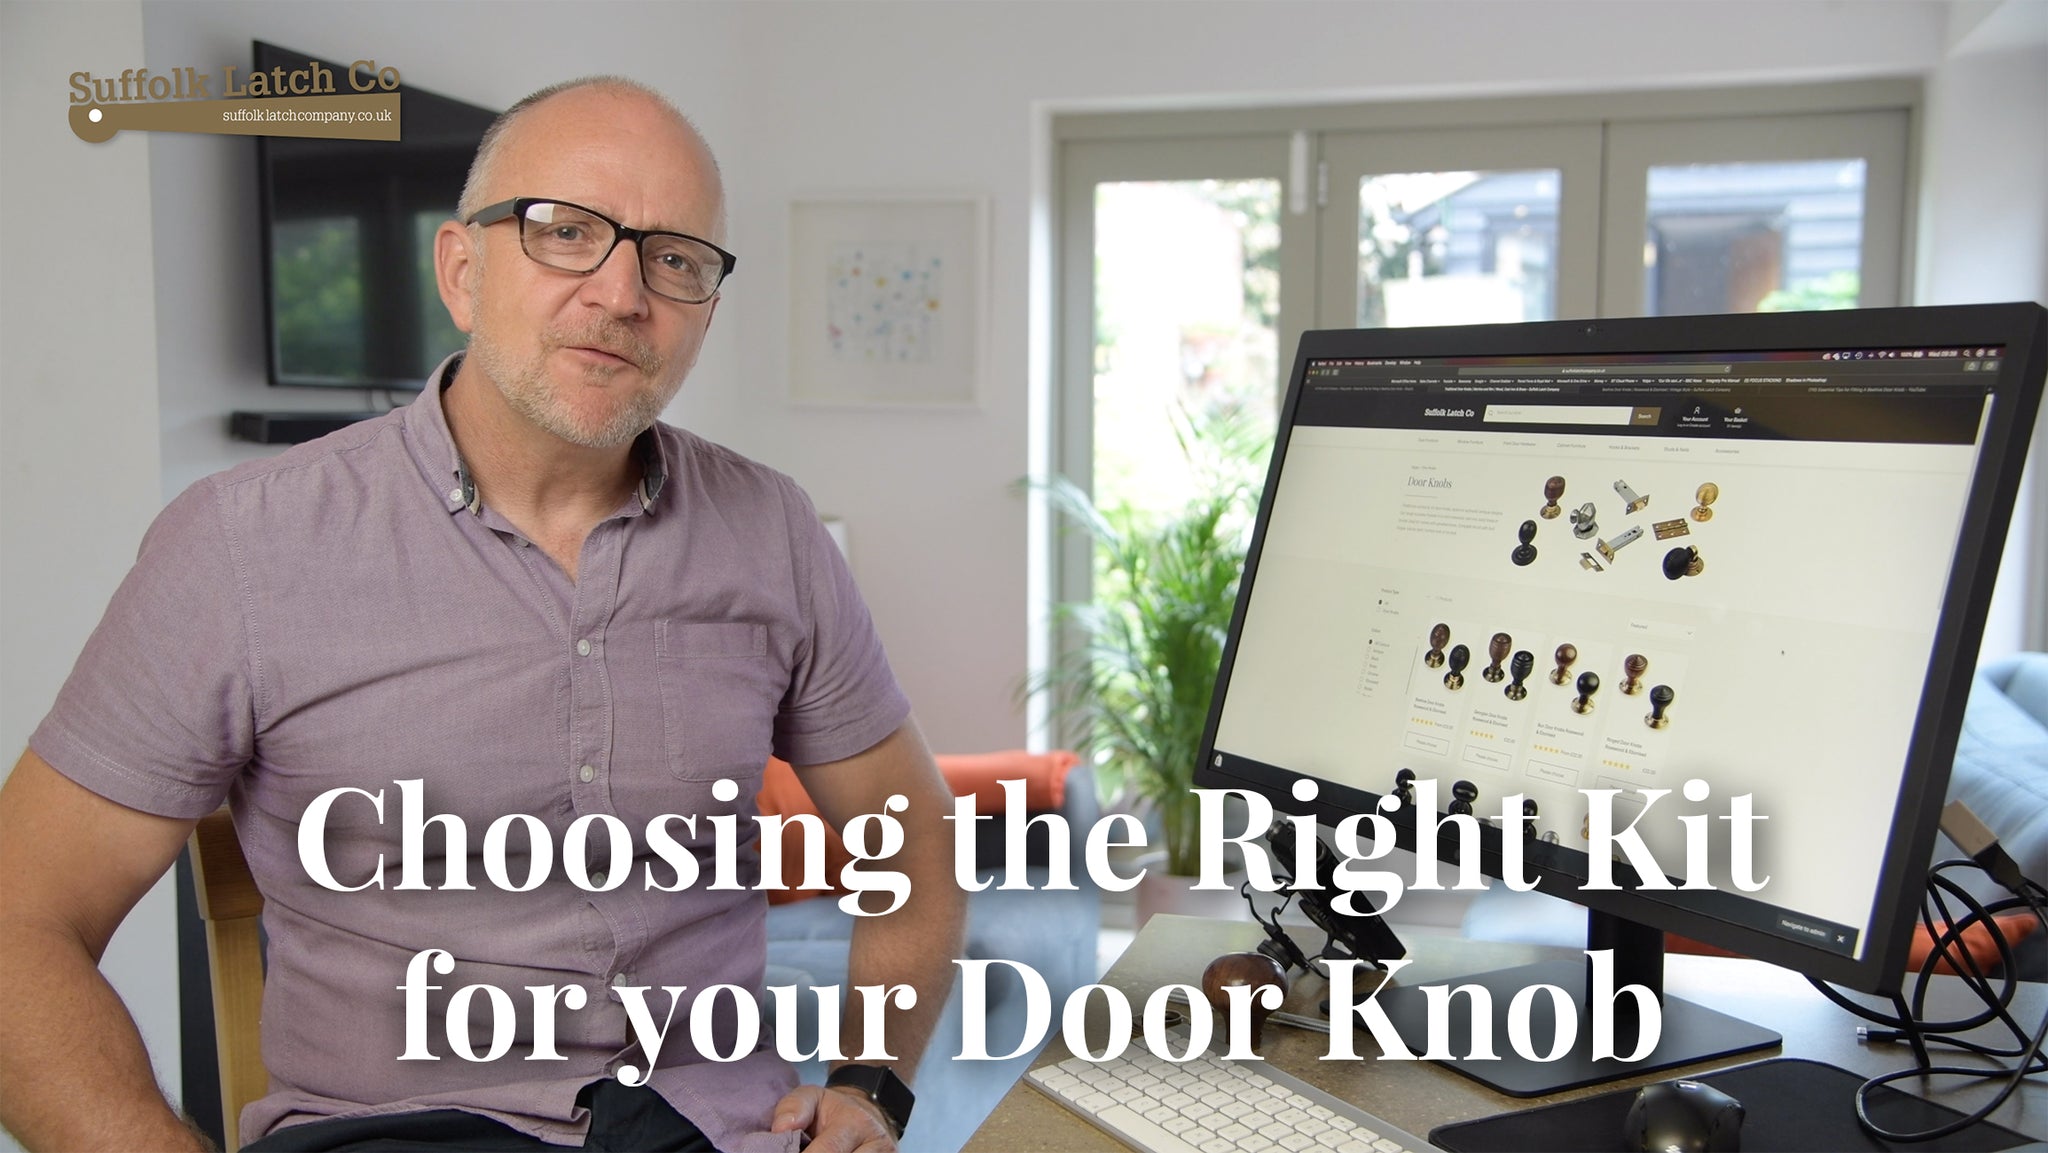 Video Guide: Choosing the Right Kit for your Door Knob